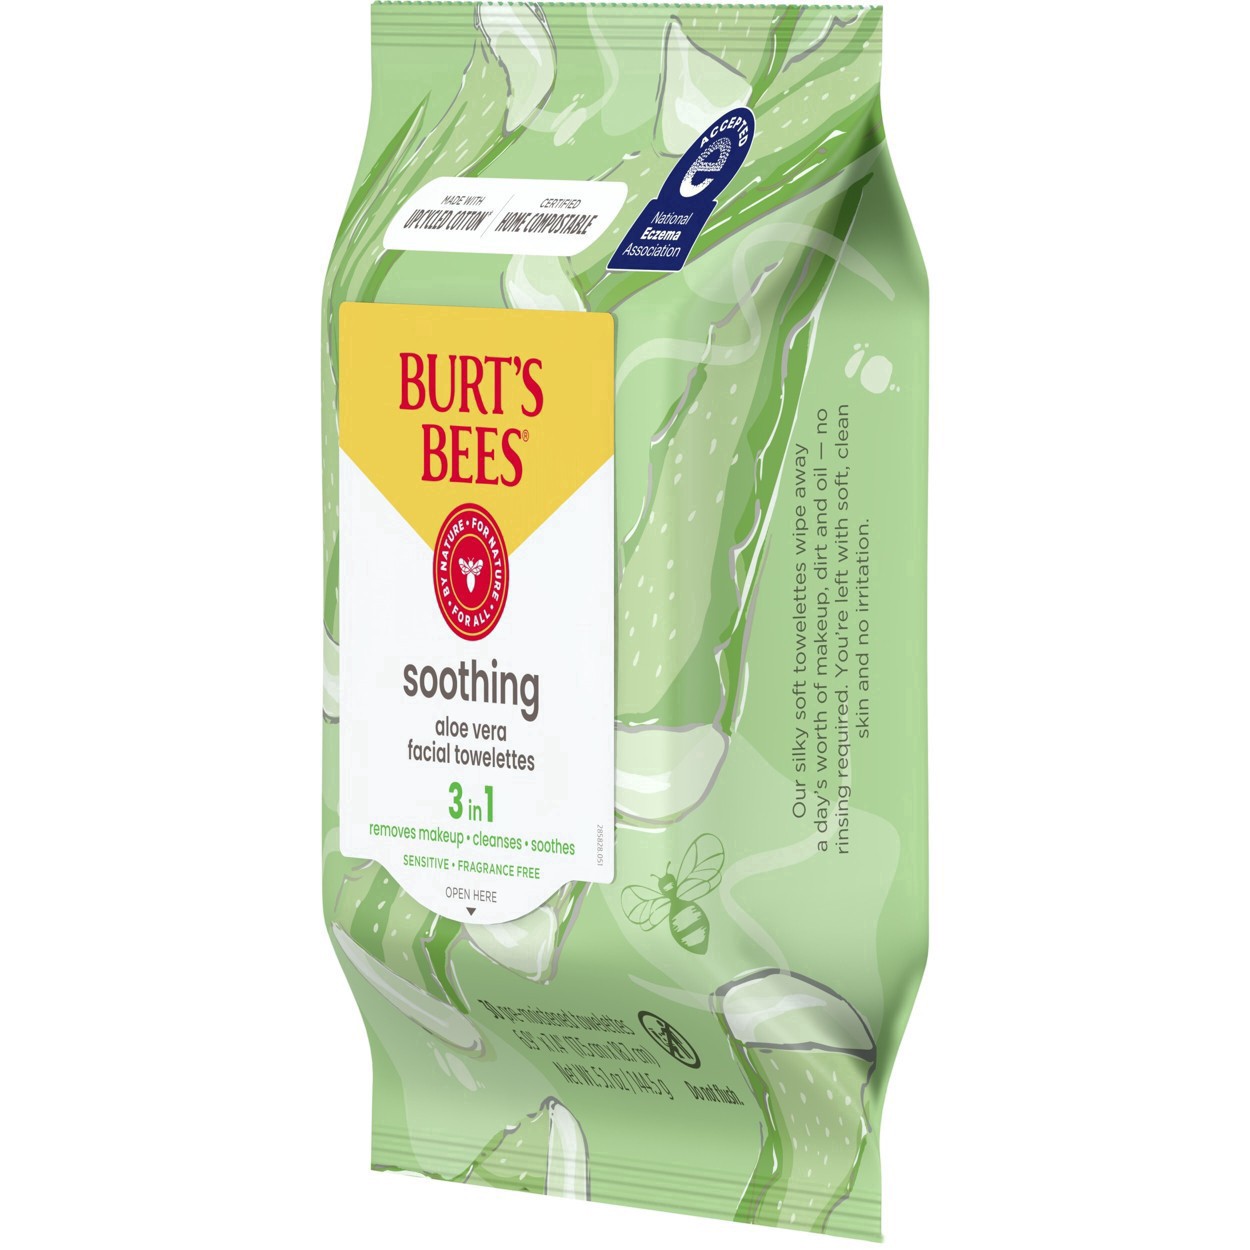 slide 75 of 137, Burt's Bees Soothing Facial Cleanser and Makeup Remover Towelettes with Aloe Vera for Sensitive Skin, Made with Upcycled Cotton, 30 Count, 30 ct